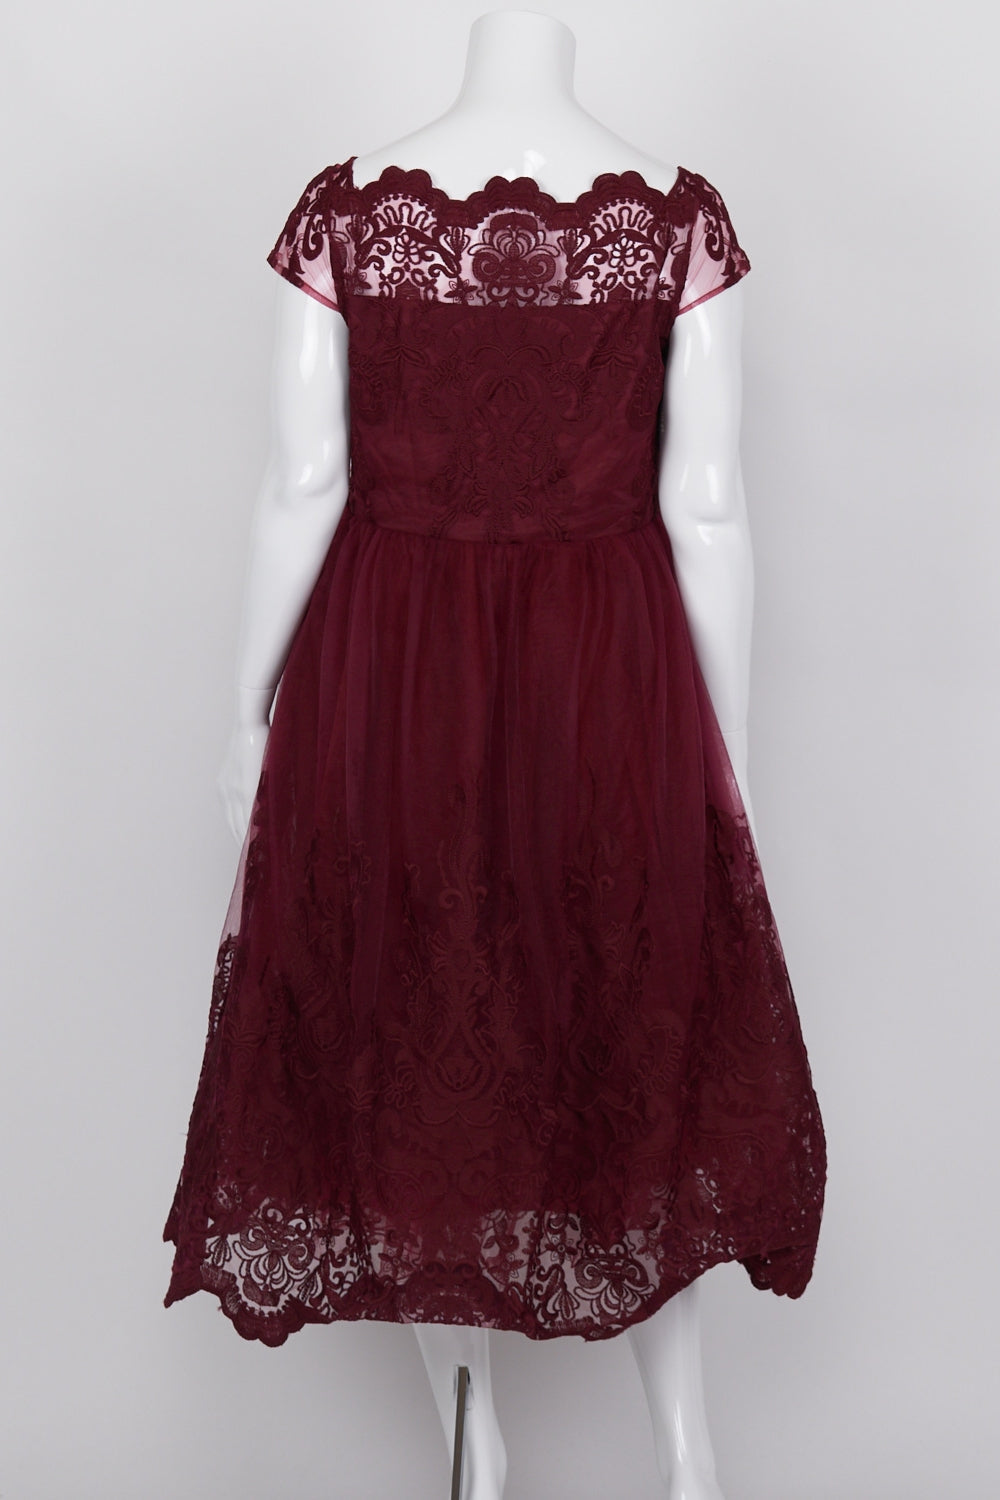 Chi Chi London Curve Burgundy Lace Tulle Dress 18